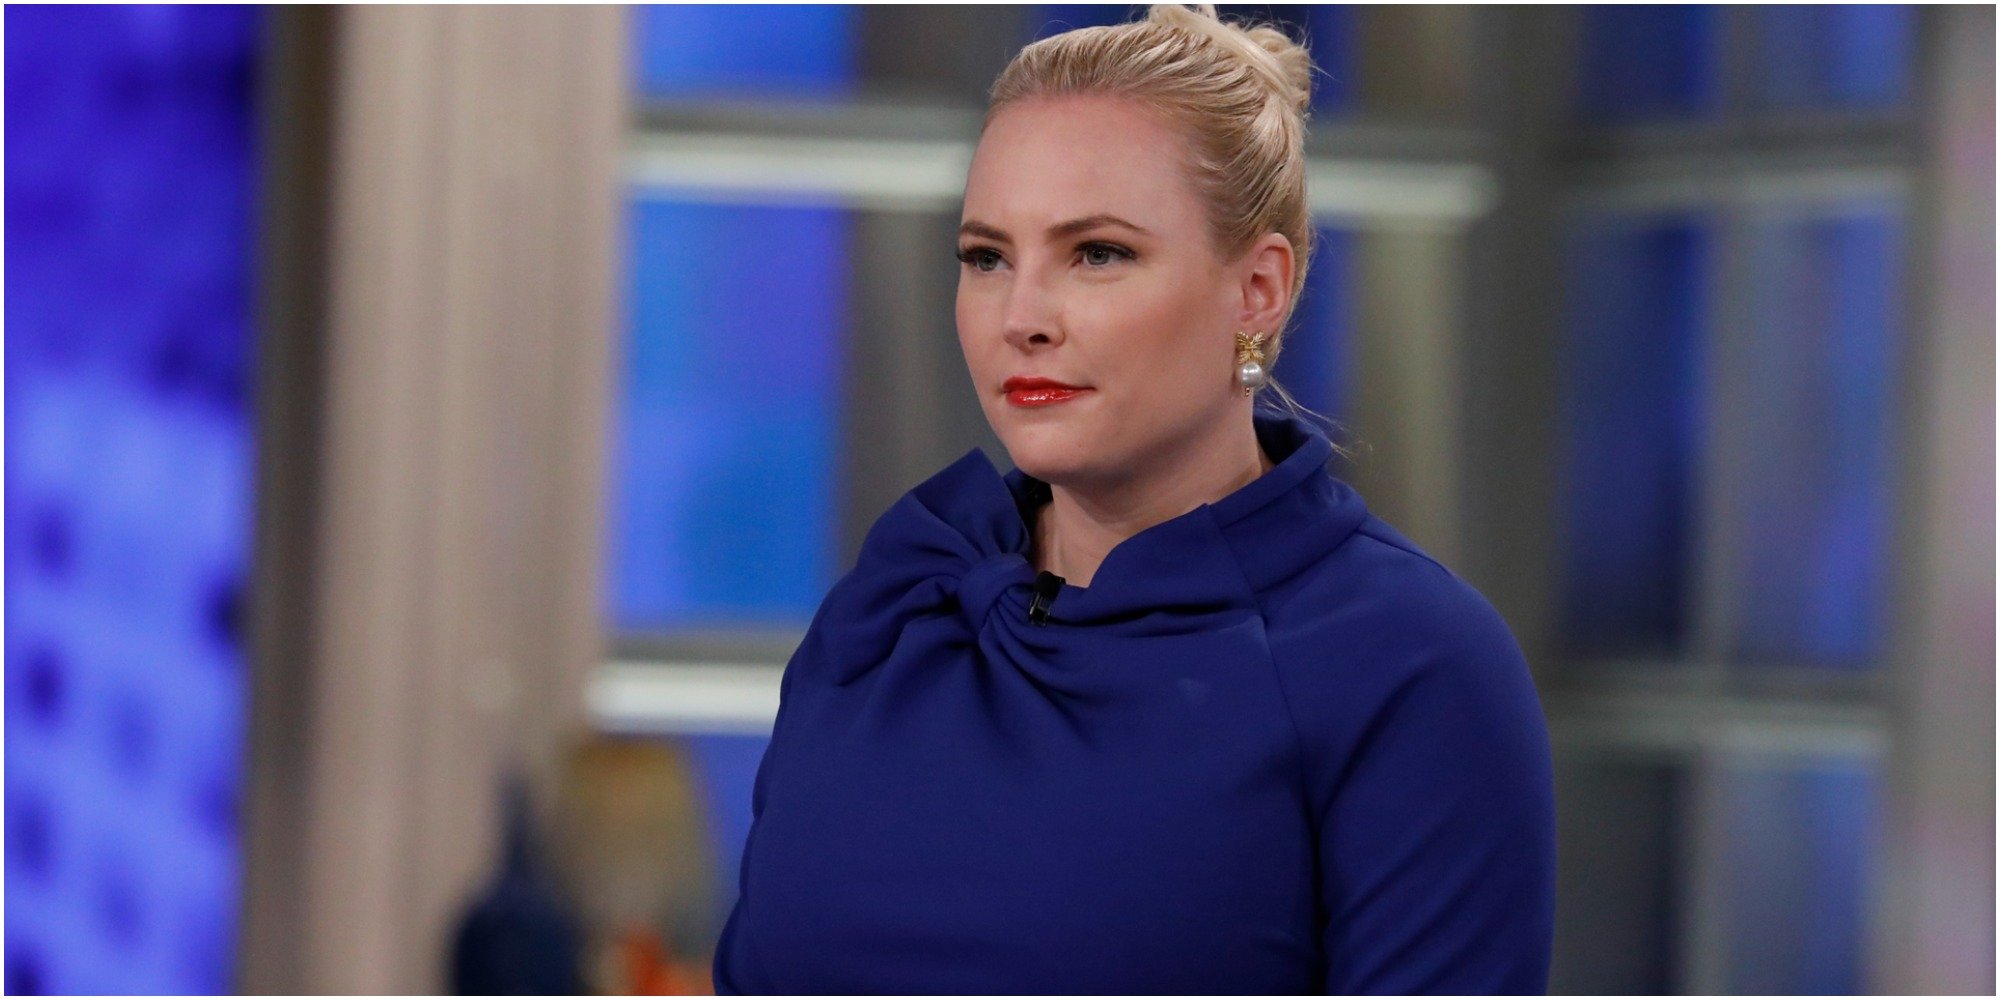 Meghan McCain Slams ‘The View’ Says Show ‘Brings Out the Worst in People’